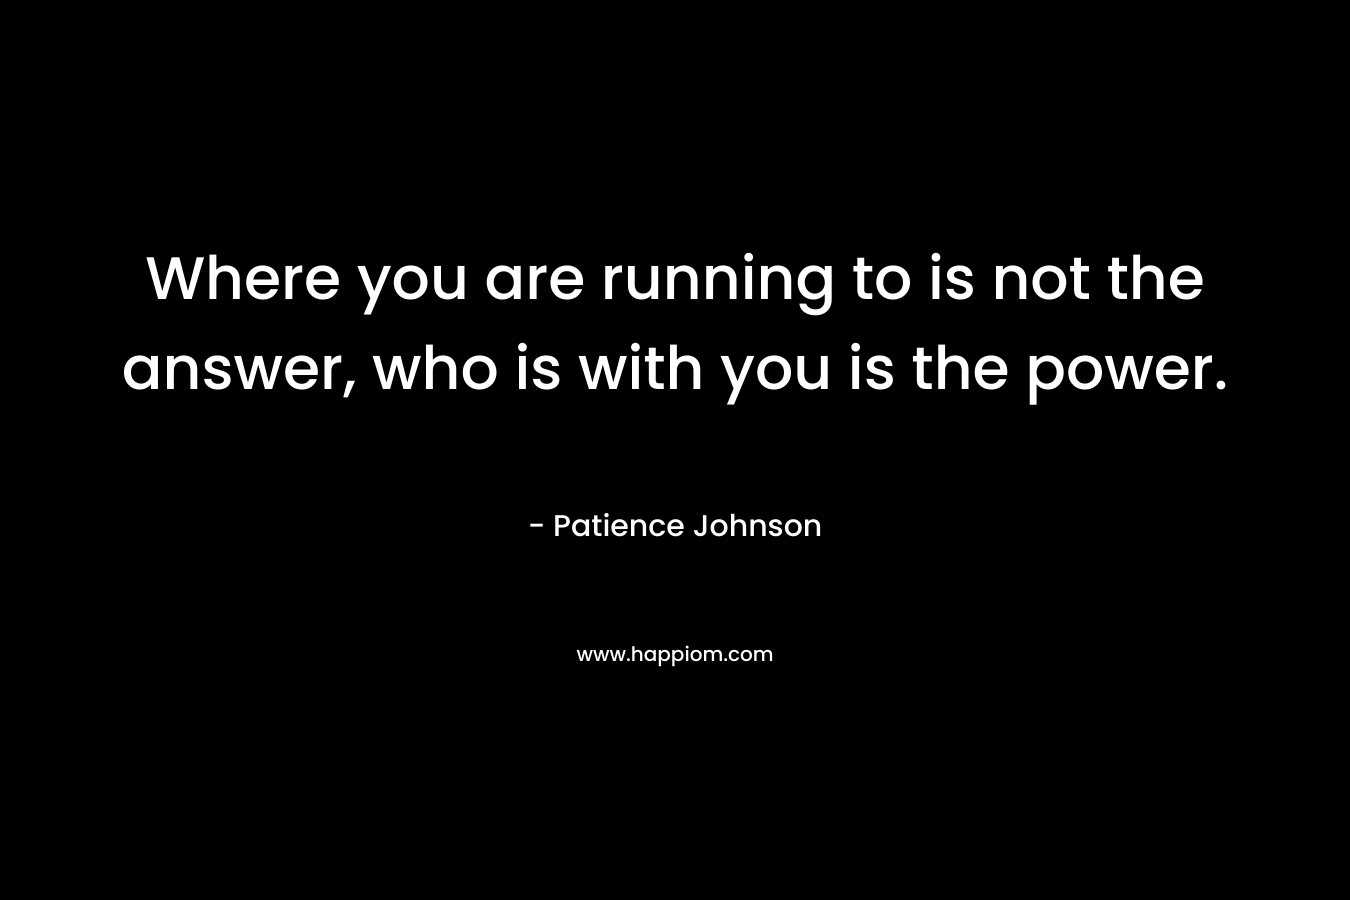 Where you are running to is not the answer, who is with you is the power. – Patience Johnson